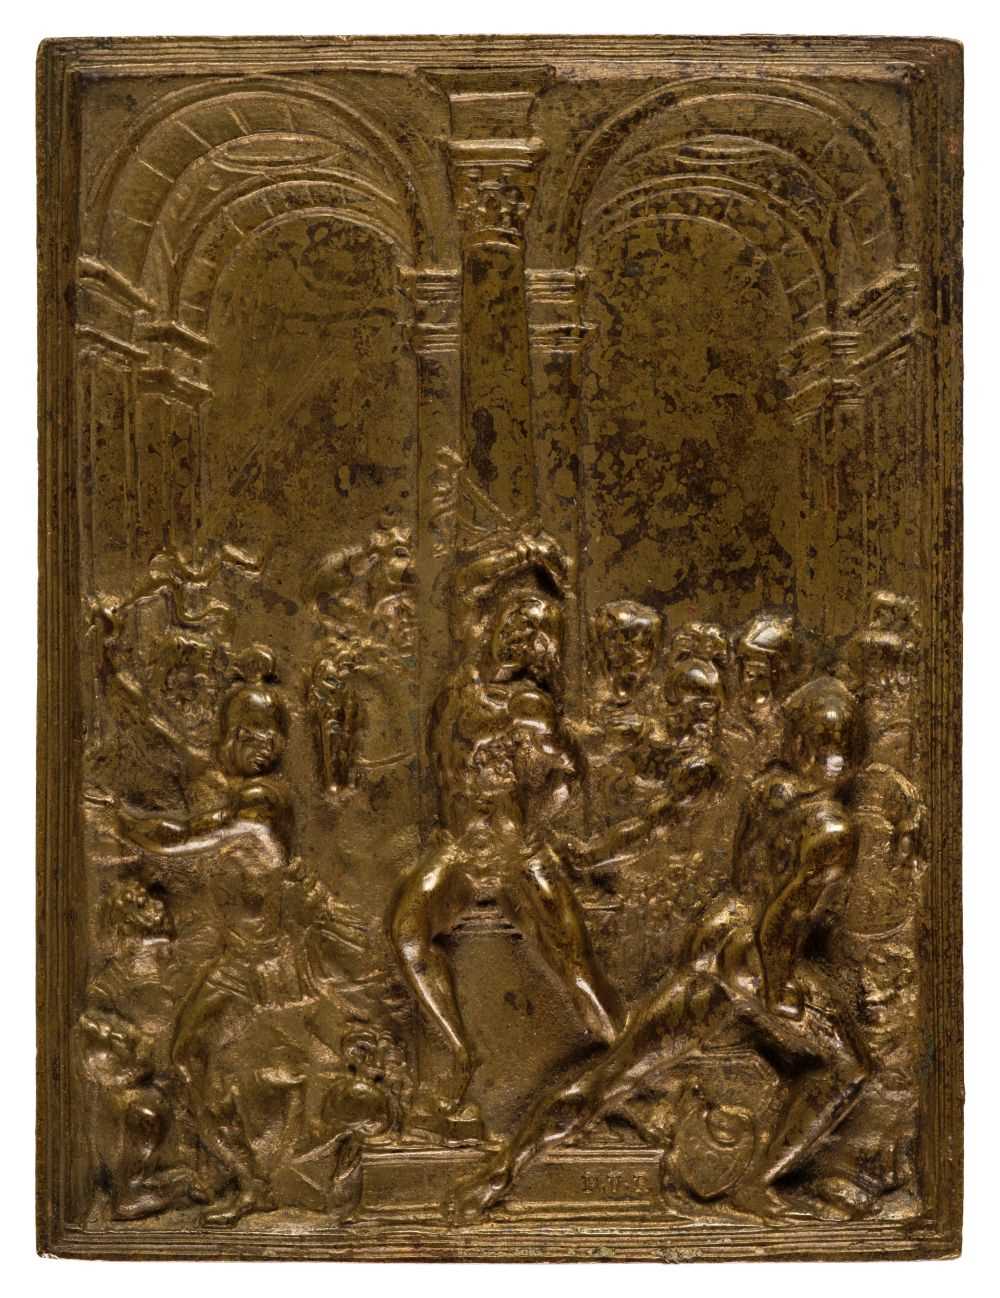 Lot 353 - Moderno, (1467-1528, after). The Flagellation of Christ, 2nd quarter 19th century